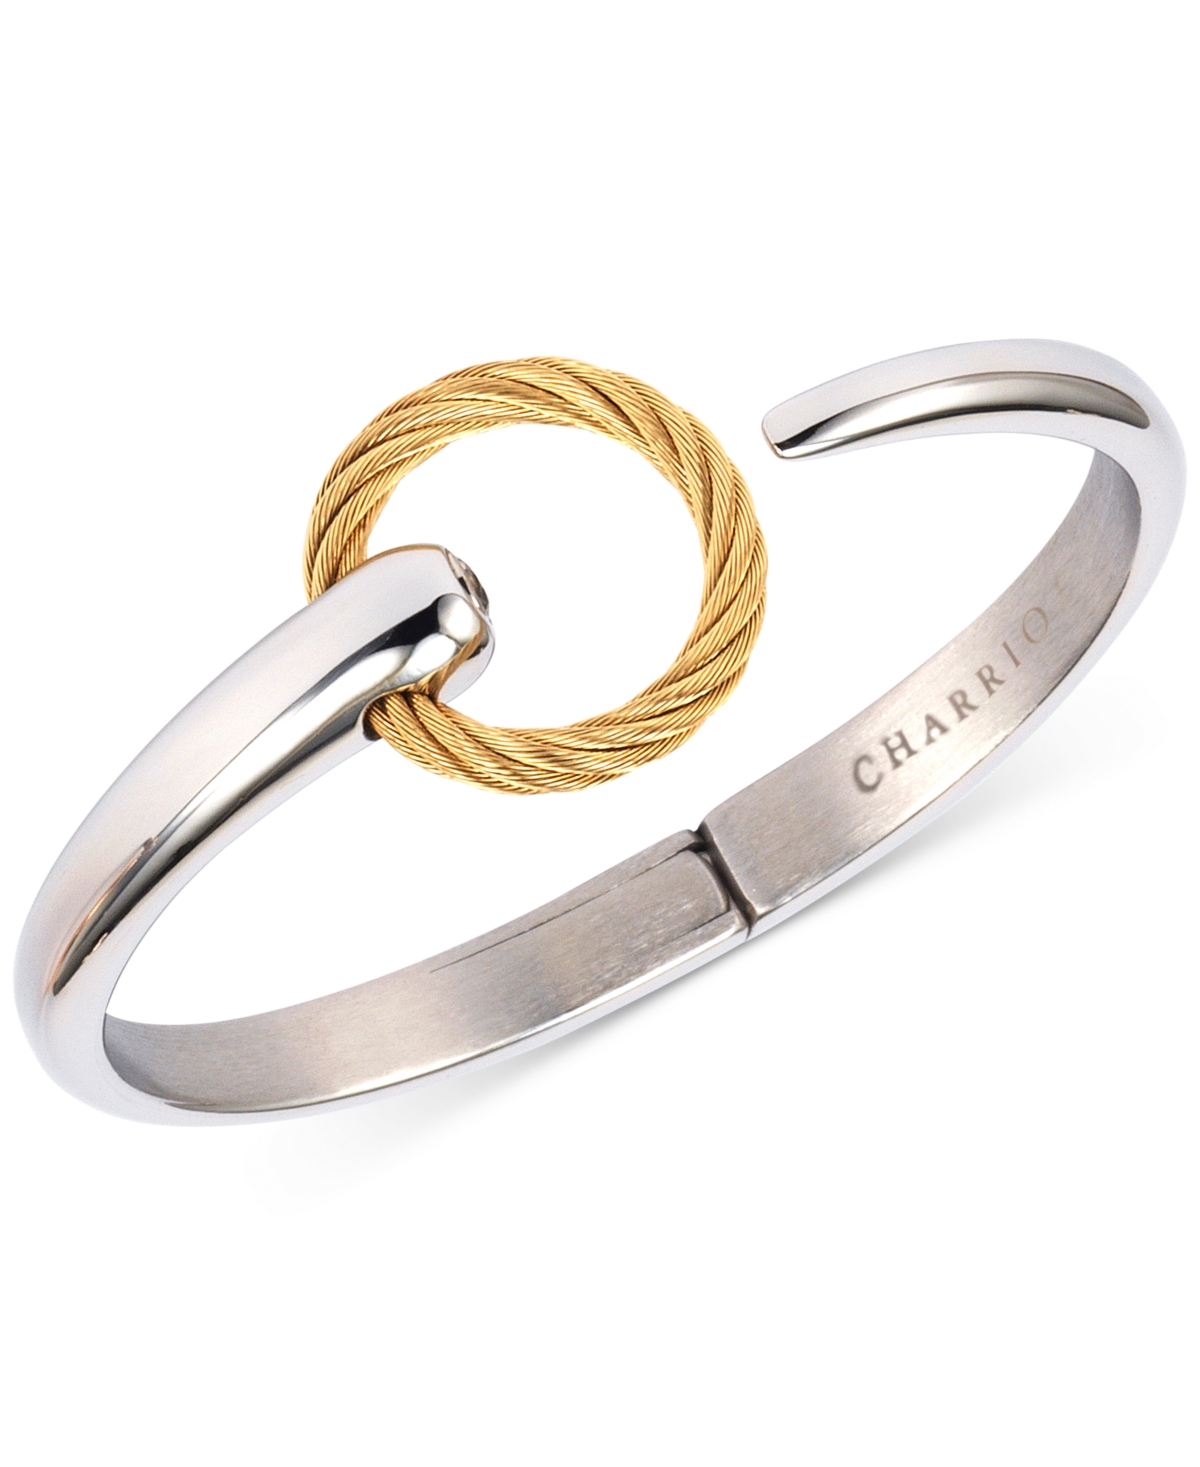 Charriol White Topaz Two-Tone Circle Cuff Bracelet (1/3 ct. t.w.) in Stainless Steel and Gold-Tone Pvd Stainless Steel